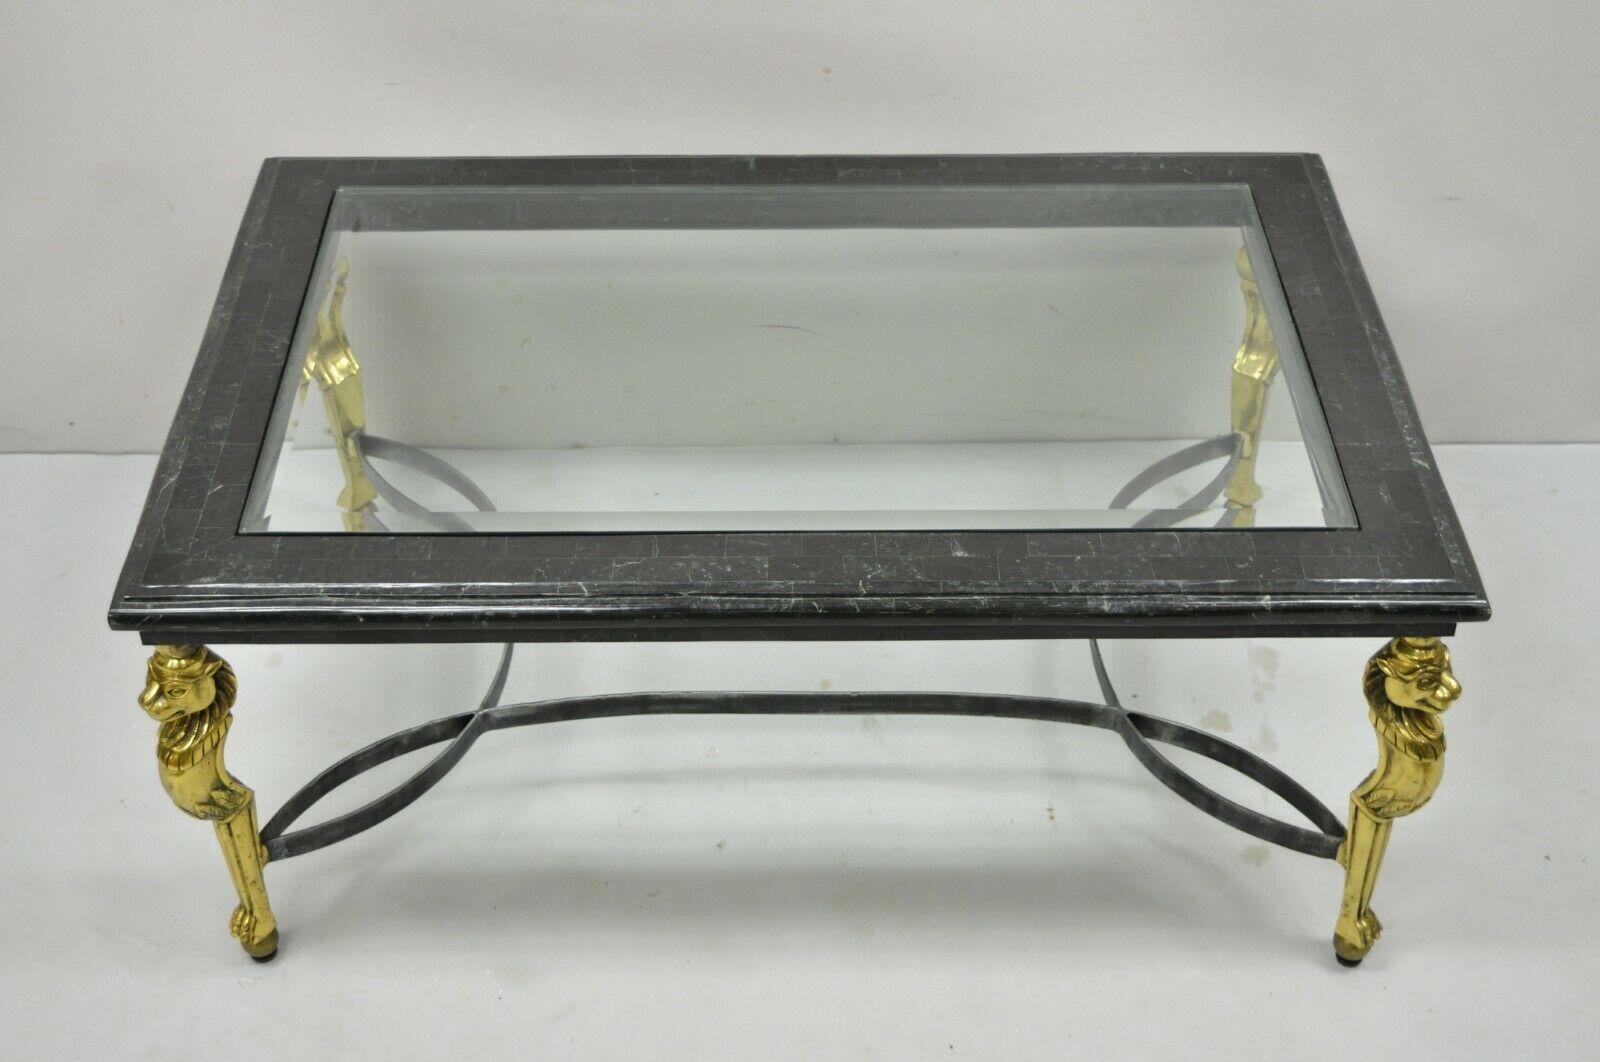 Italian Regency Style Brass Lion Marble Inlay Glass Top Steel Coffee Table. Item features an inlaid marble top, inset beveled glass, brass lion legs and paw feet, quality craftsmanship, great style and form. Circa Late 20th Century. Measurements: